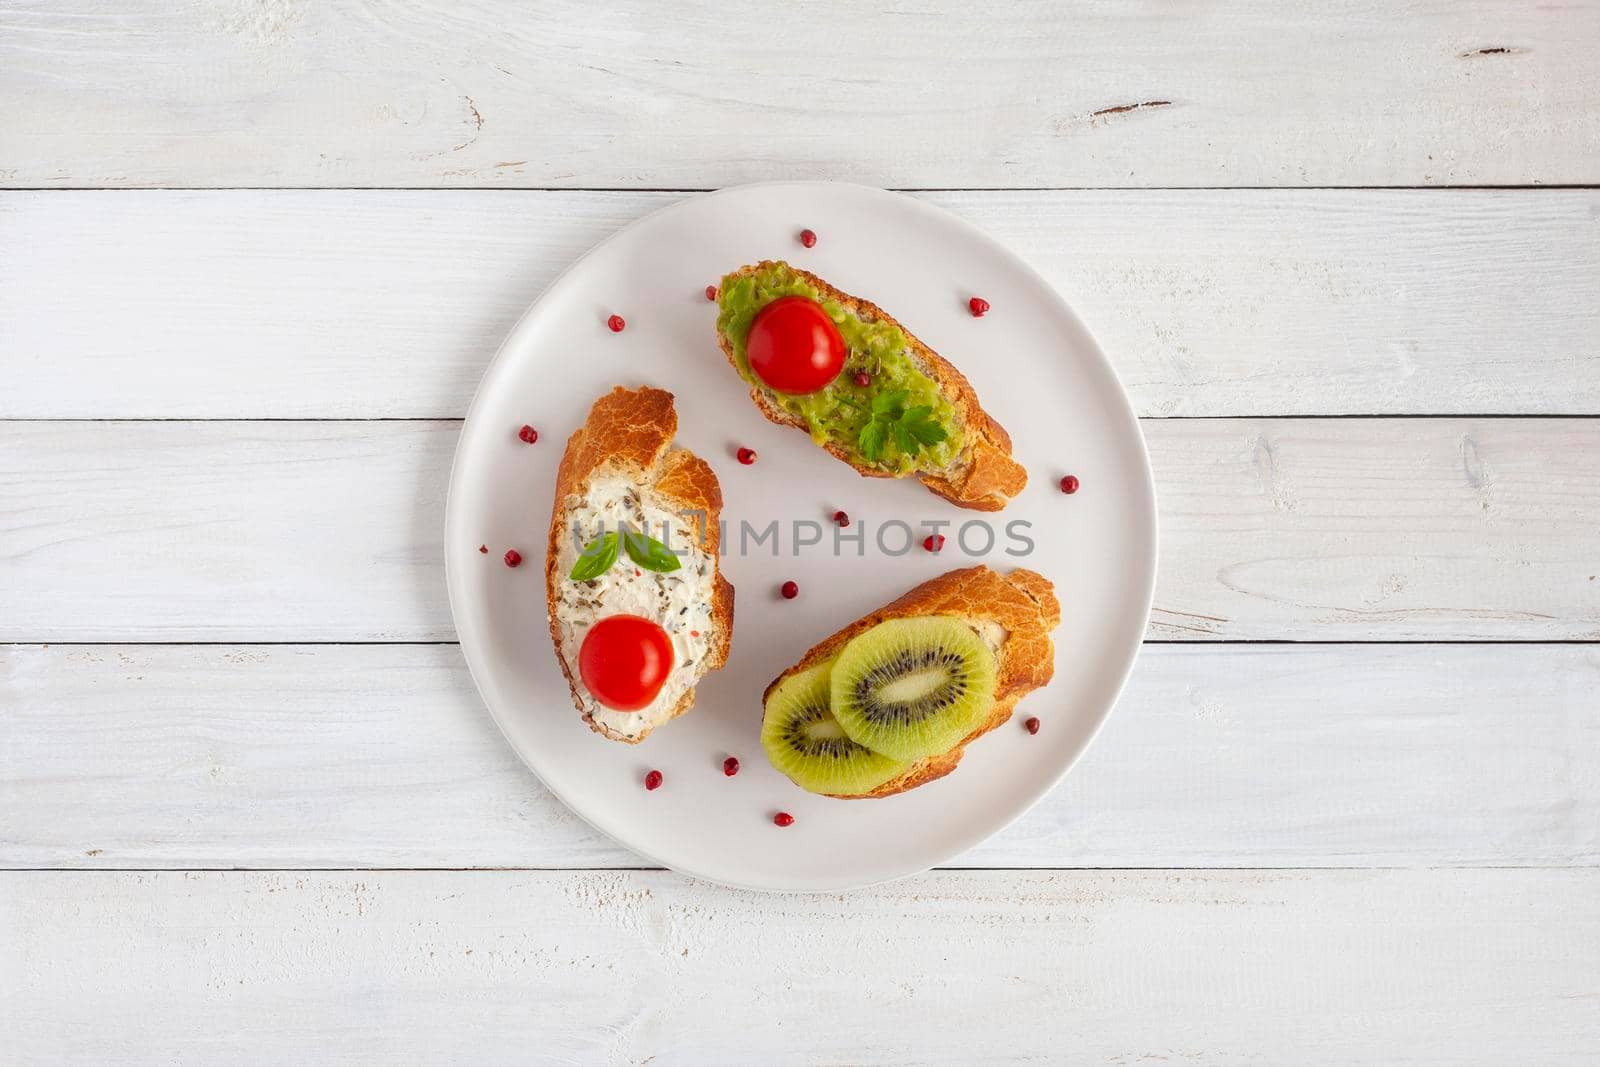 three homemade bright mini sandwichs with cream cheese and vegetables, on a white plate on wooden background, top view